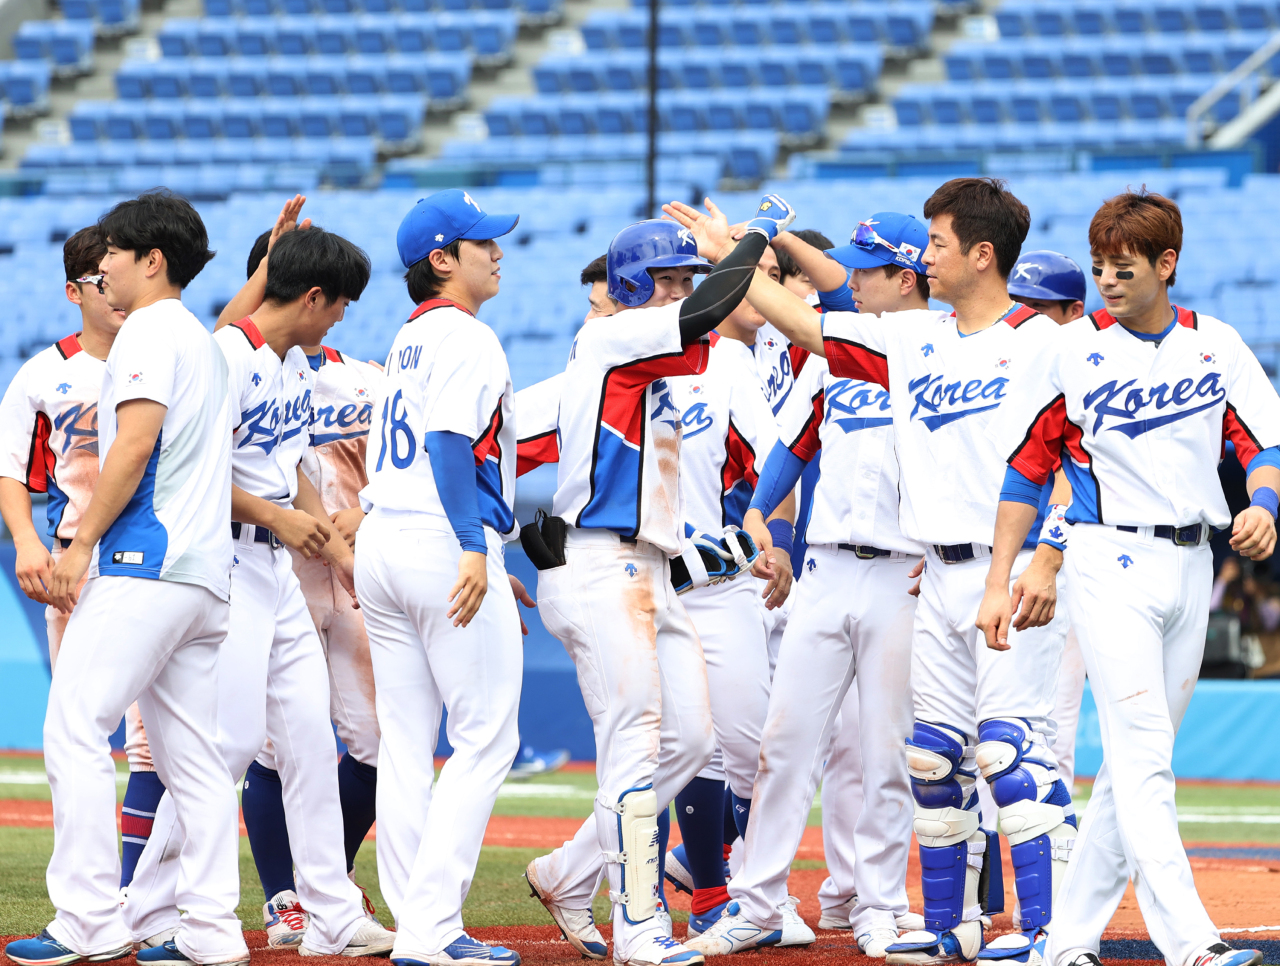 South Korean players celebrate their 11-1 victory over Israel in the teams' second-round game at the Tokyo Olympic baseball tournament at Yokohama Stadium in Yokohama, Japan, on Monday. (Yonhap)